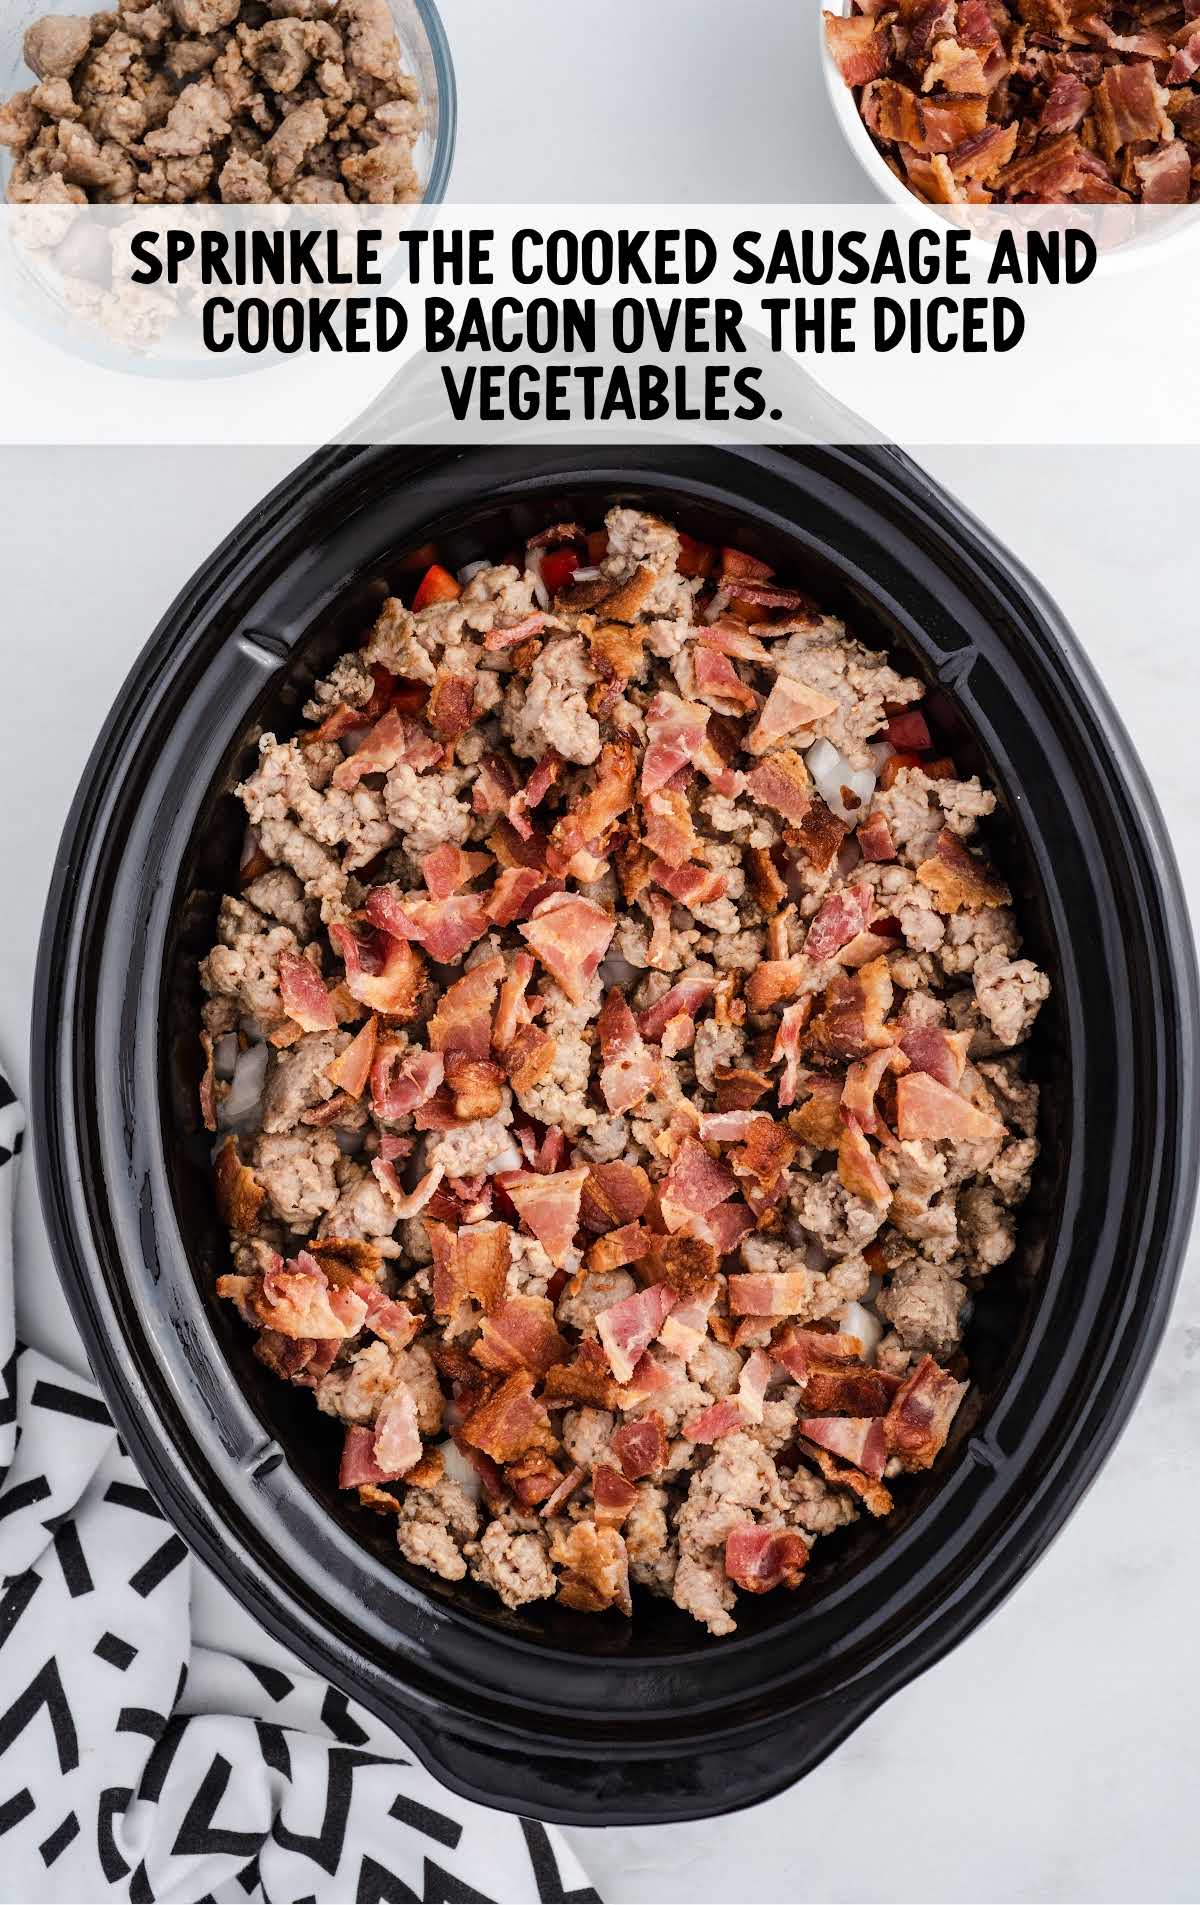 cooked sausage and cooked bacon sprinkled over the vegetable in a crockpot